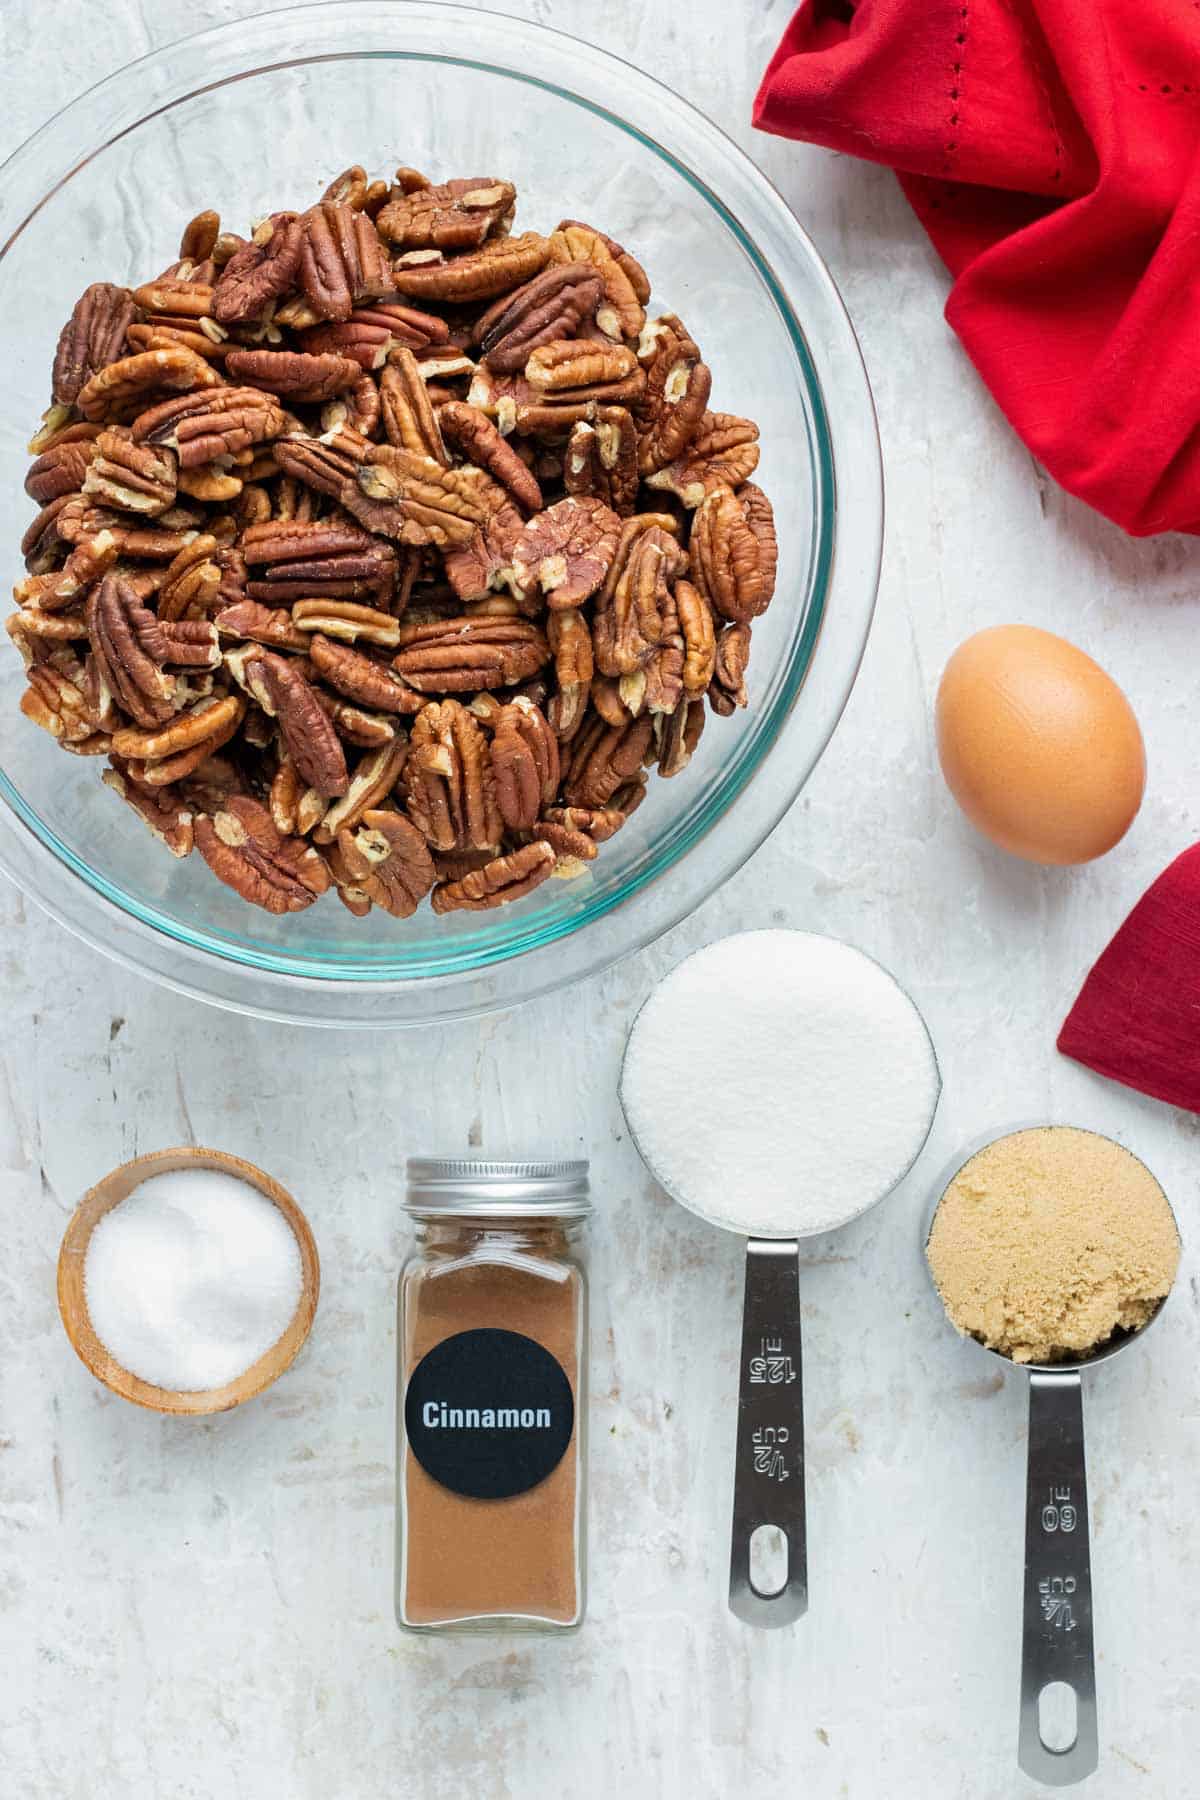 Pecans, cinnamon, sugar, and an egg as the ingredients for an easy, gluten-free candied pecans recipe.